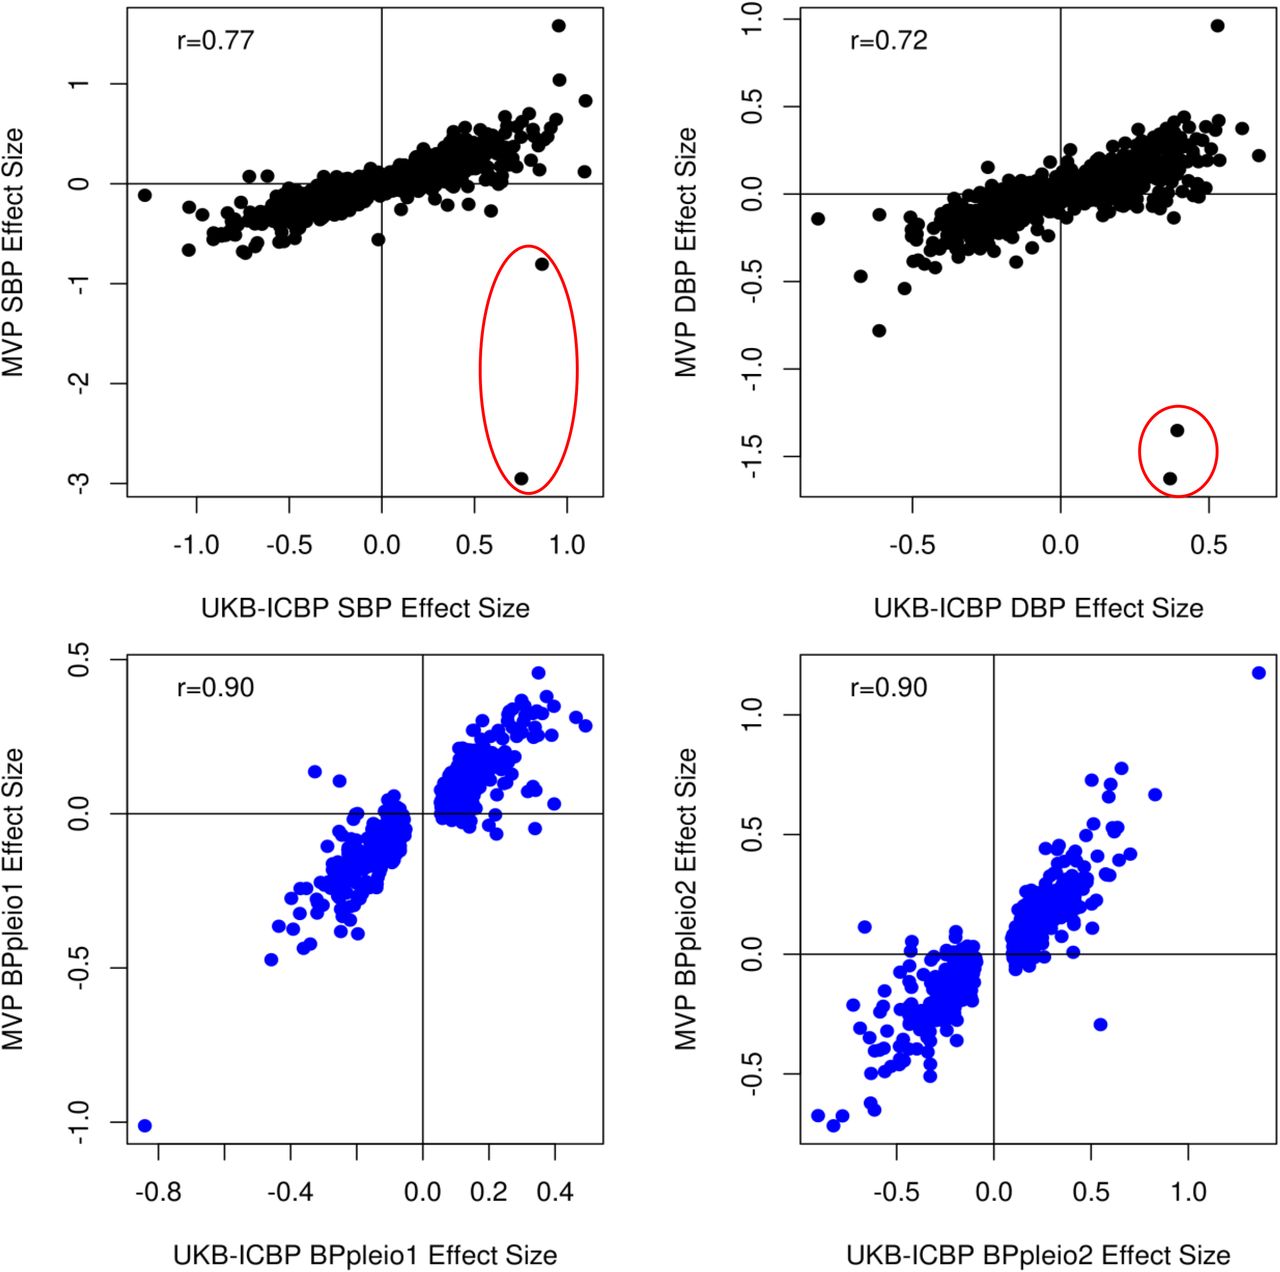 Genome-wide pleiotropy analysis identifies novel blood pressure variants and improves its polygenic risk scores medRxiv